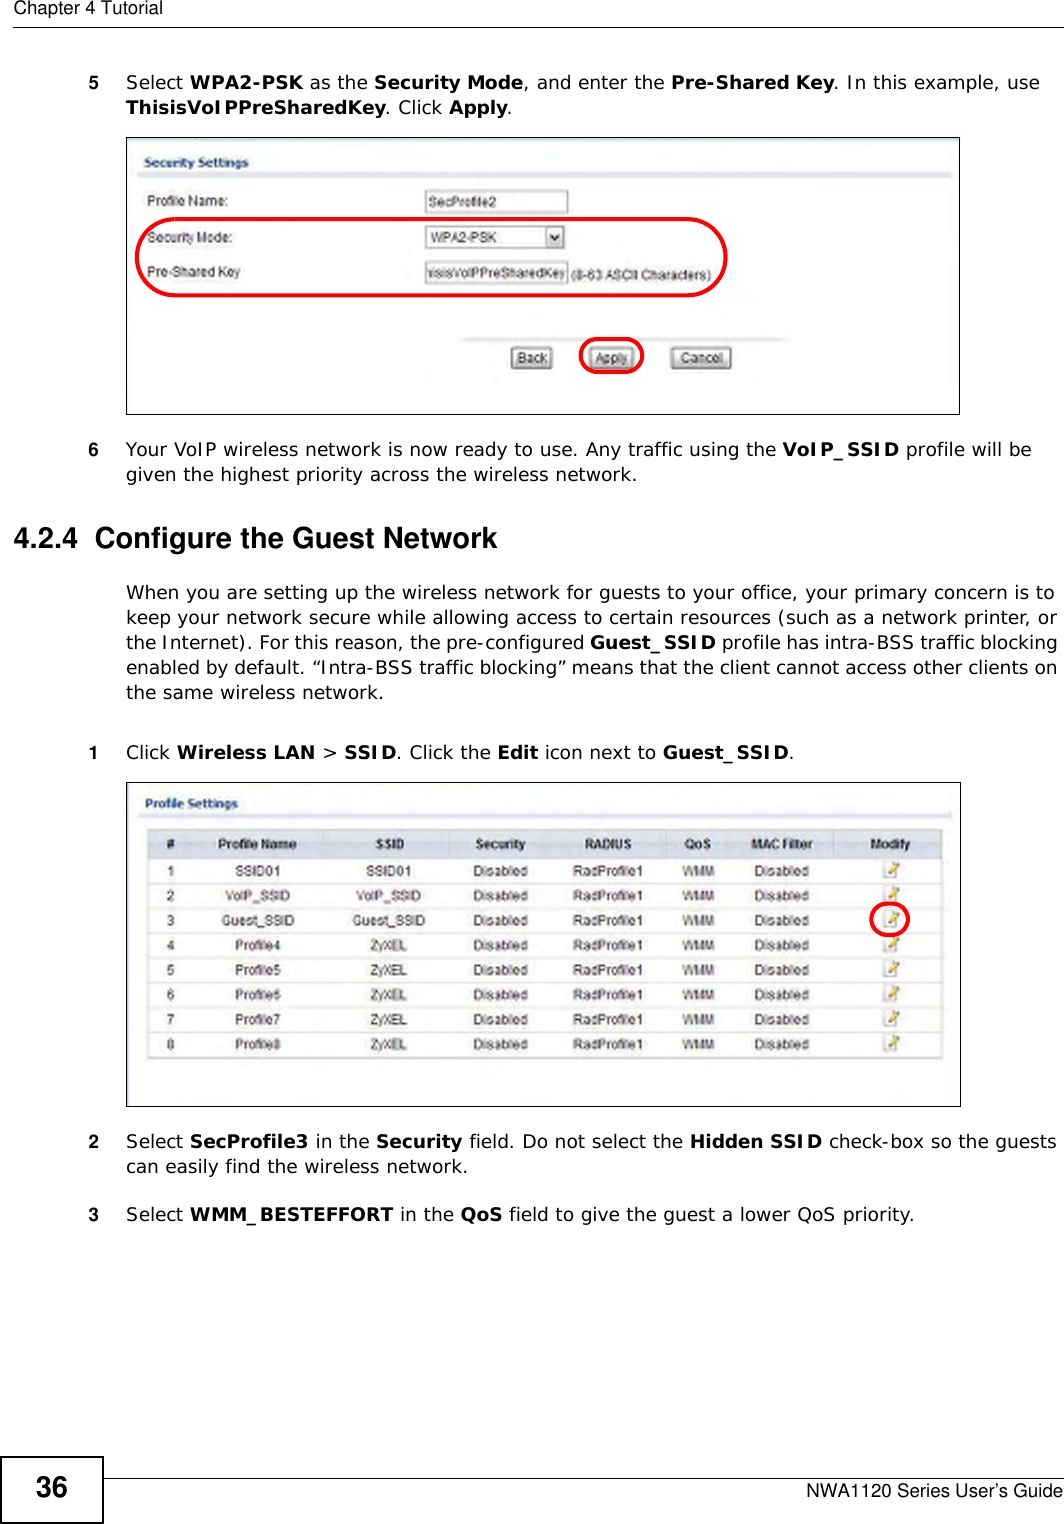 Chapter 4 TutorialNWA1120 Series User’s Guide365Select WPA2-PSK as the Security Mode, and enter the Pre-Shared Key. In this example, use ThisisVoIPPreSharedKey. Click Apply. 6Your VoIP wireless network is now ready to use. Any traffic using the VoIP_SSID profile will be given the highest priority across the wireless network.4.2.4  Configure the Guest NetworkWhen you are setting up the wireless network for guests to your office, your primary concern is to keep your network secure while allowing access to certain resources (such as a network printer, or the Internet). For this reason, the pre-configured Guest_SSID profile has intra-BSS traffic blocking enabled by default. “Intra-BSS traffic blocking” means that the client cannot access other clients on the same wireless network.1Click Wireless LAN &gt; SSID. Click the Edit icon next to Guest_SSID. 2Select SecProfile3 in the Security field. Do not select the Hidden SSID check-box so the guests can easily find the wireless network. 3Select WMM_BESTEFFORT in the QoS field to give the guest a lower QoS priority. 